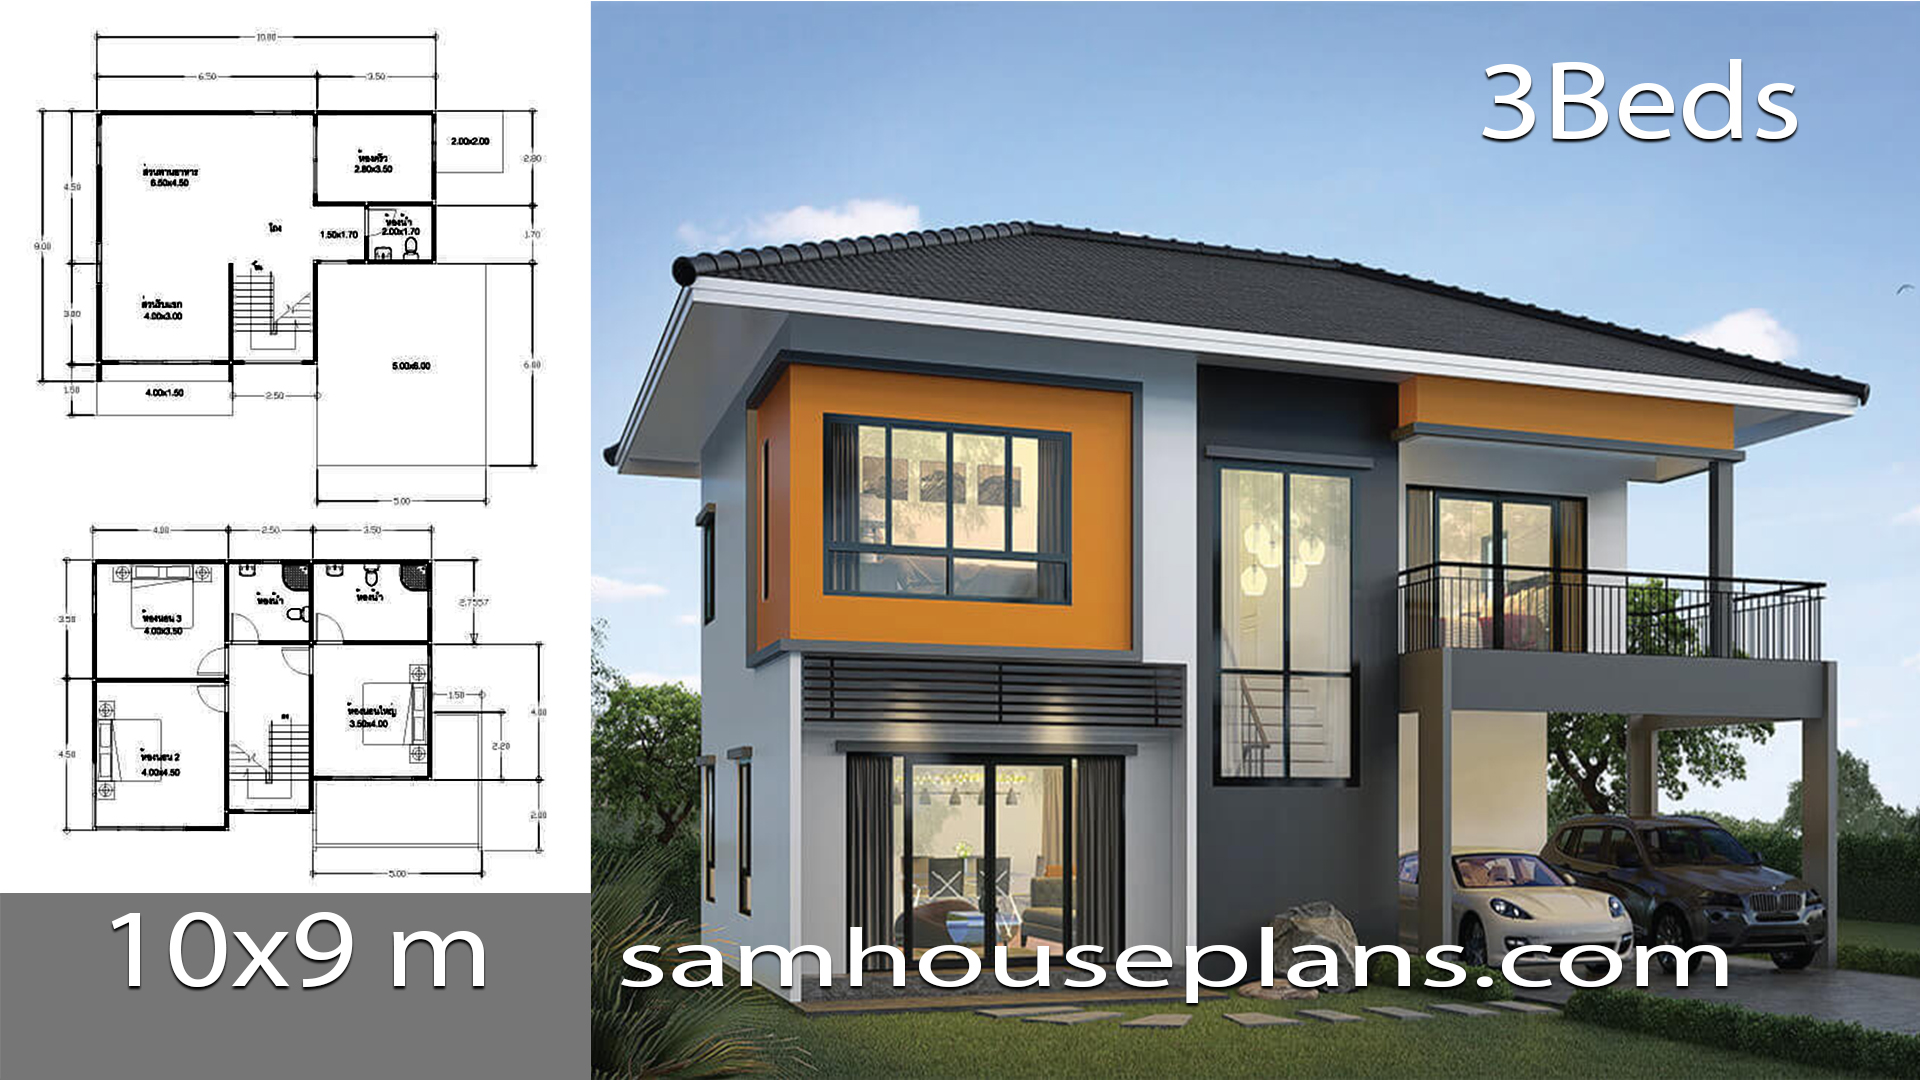 House Plans Idea 10x9m with 3 Bedrooms